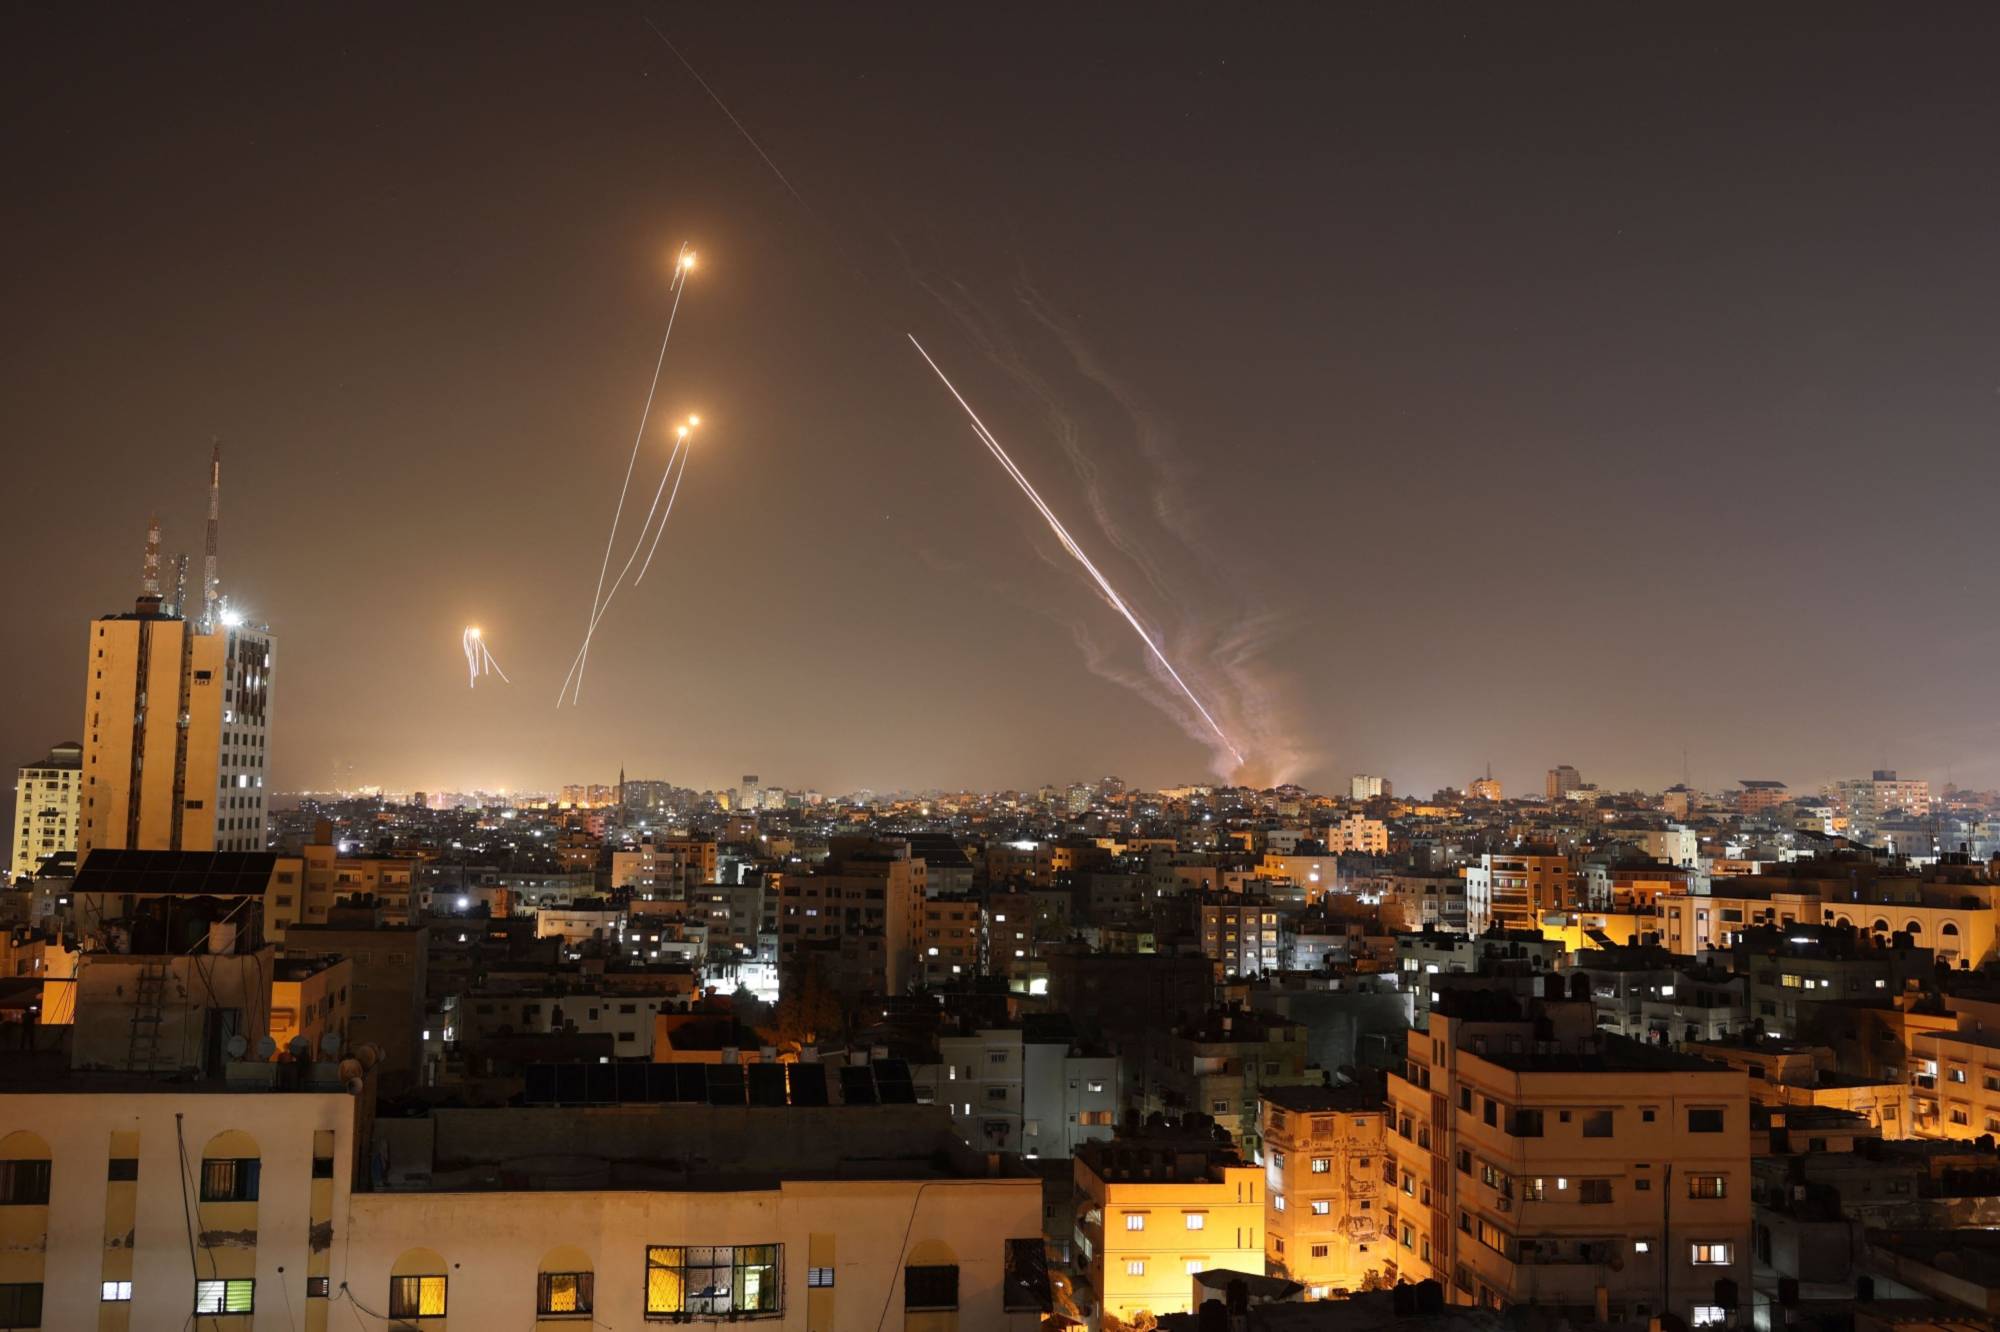 While details of the army’s operational use of AI remain largely classified, statements from military officials suggest that the Israel Defense Forces has gained battlefield experience with the controversial systems through periodic flare-ups in the Gaza Strip. | GETTY IMAGES / VIA BLOOMBERG